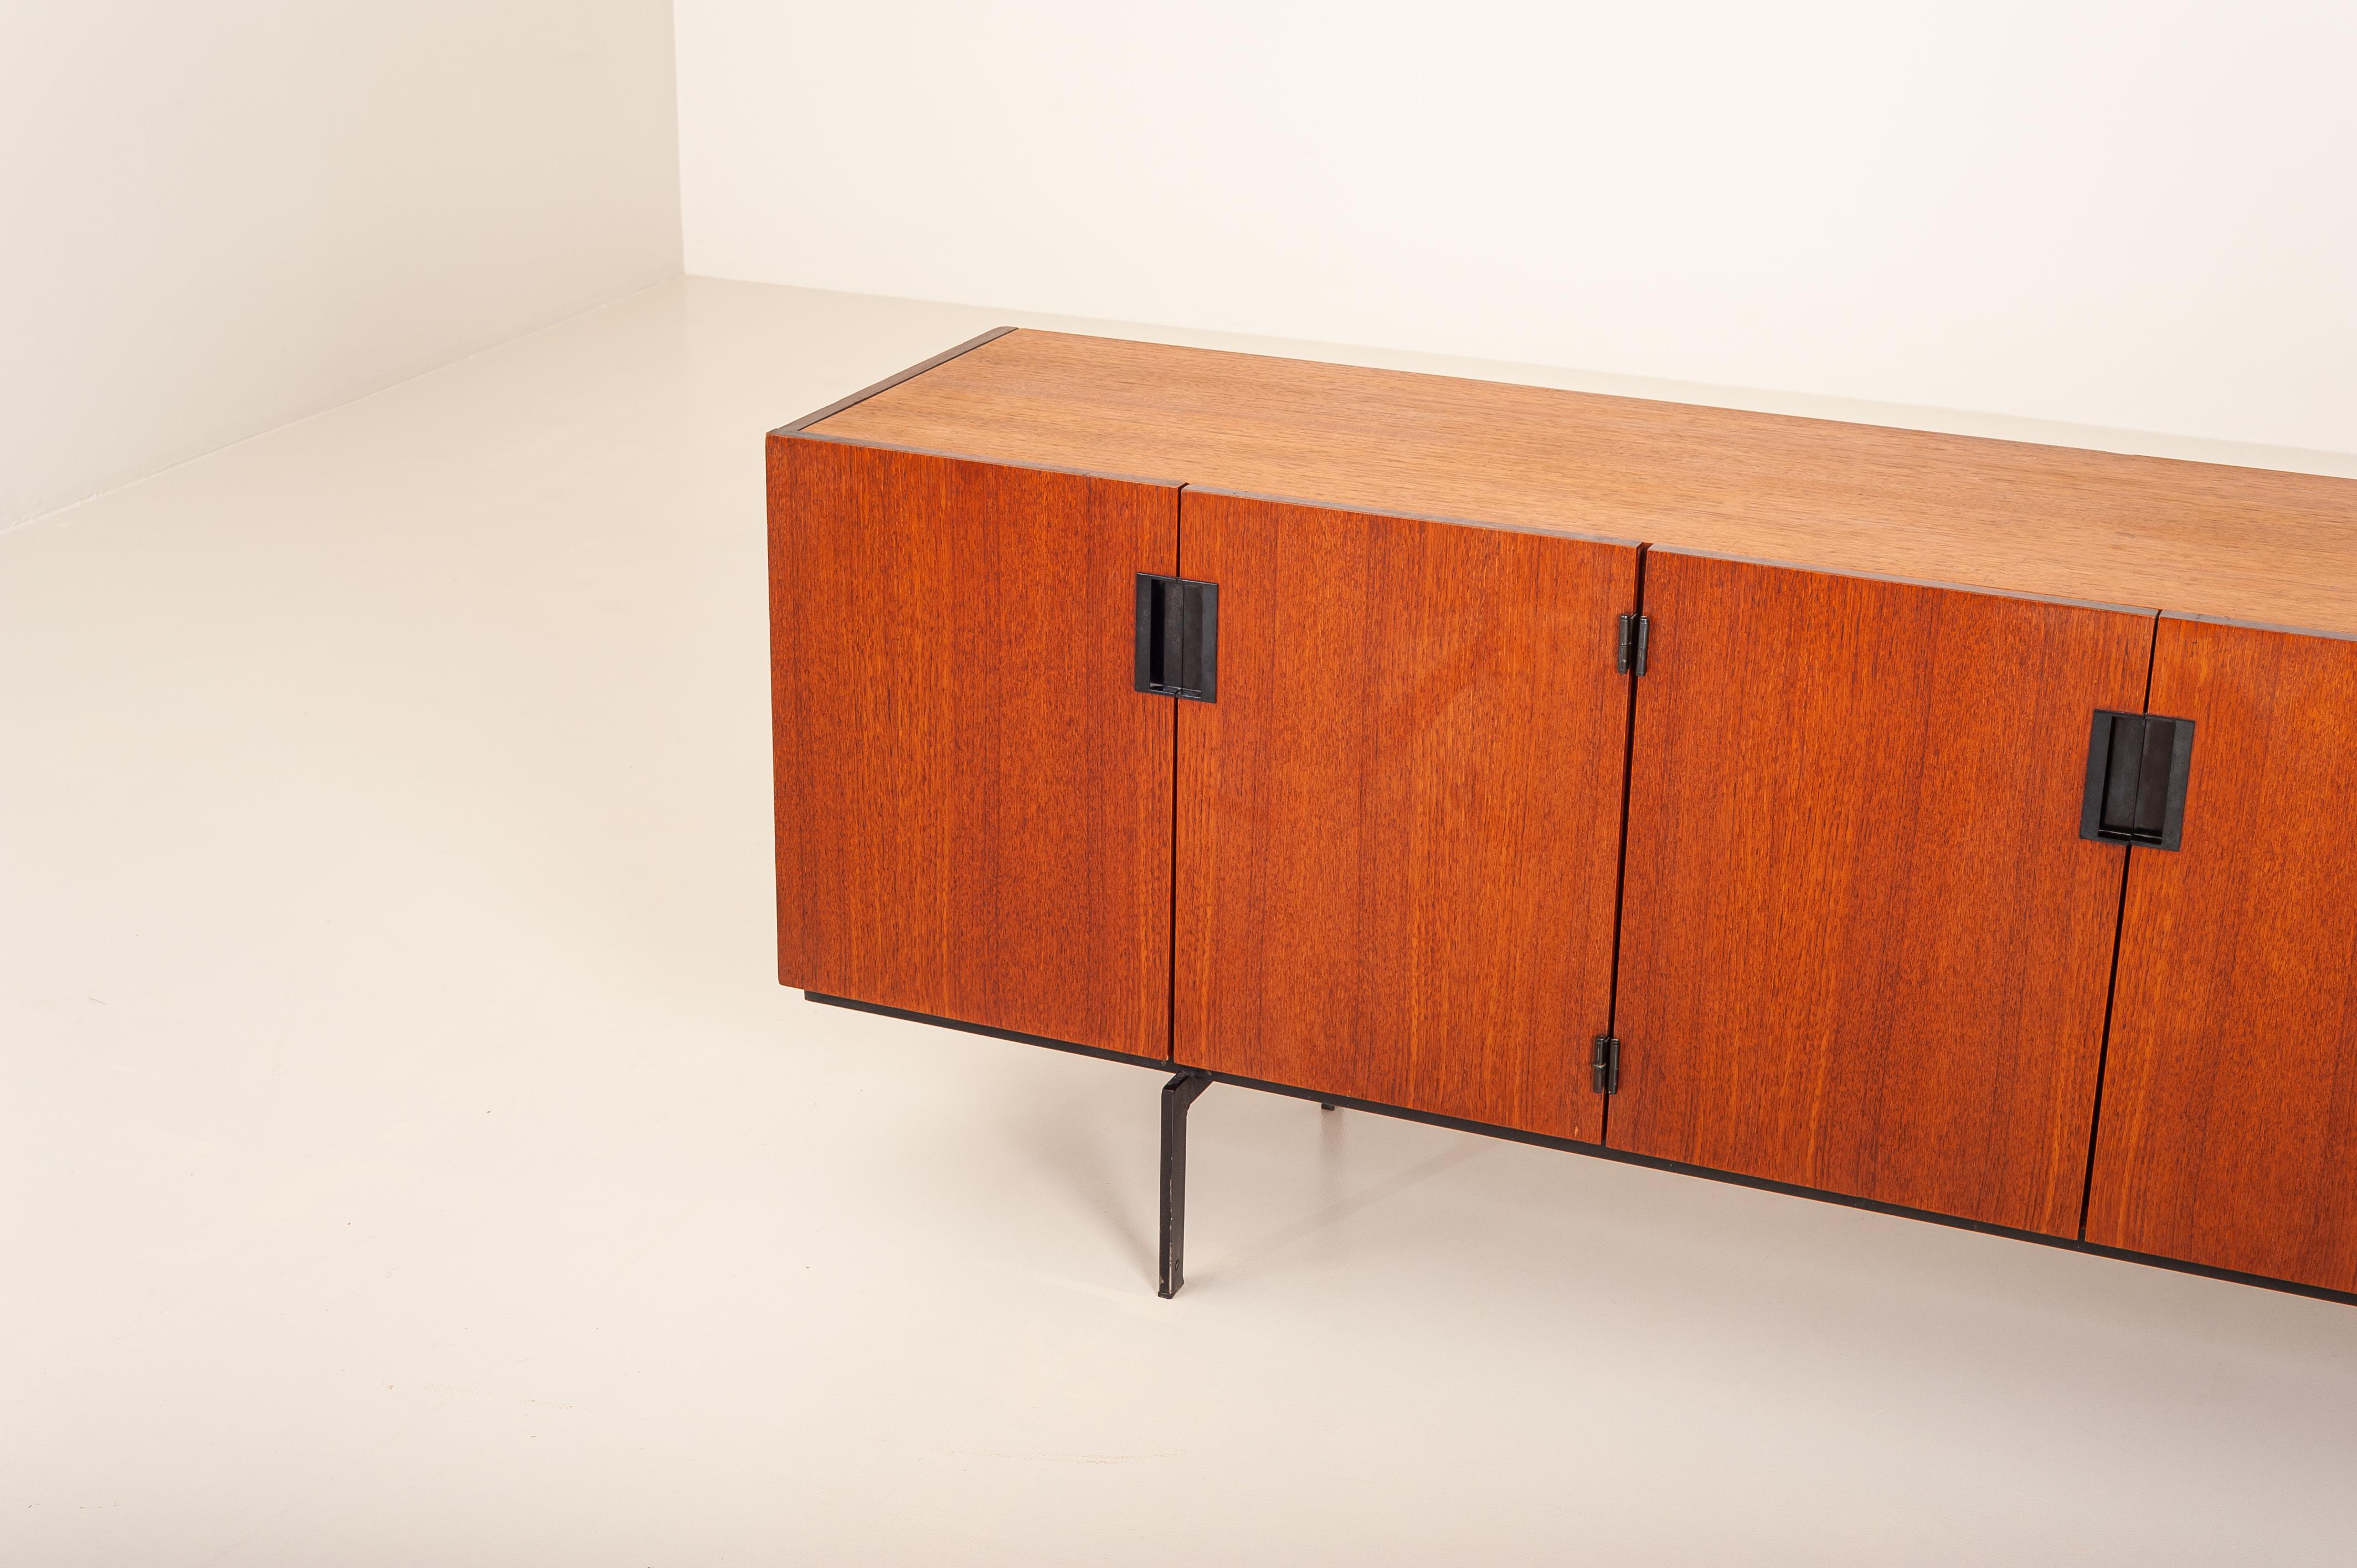 Essential and minimalistic sideboard model 'DU05' by Cees Braakman for UMS Pastoe from the Japanese series. .

Designed in the 1958, this sideboard consists of a cabinet made of teak veneer, peculiar black integrated handles and a discreet black